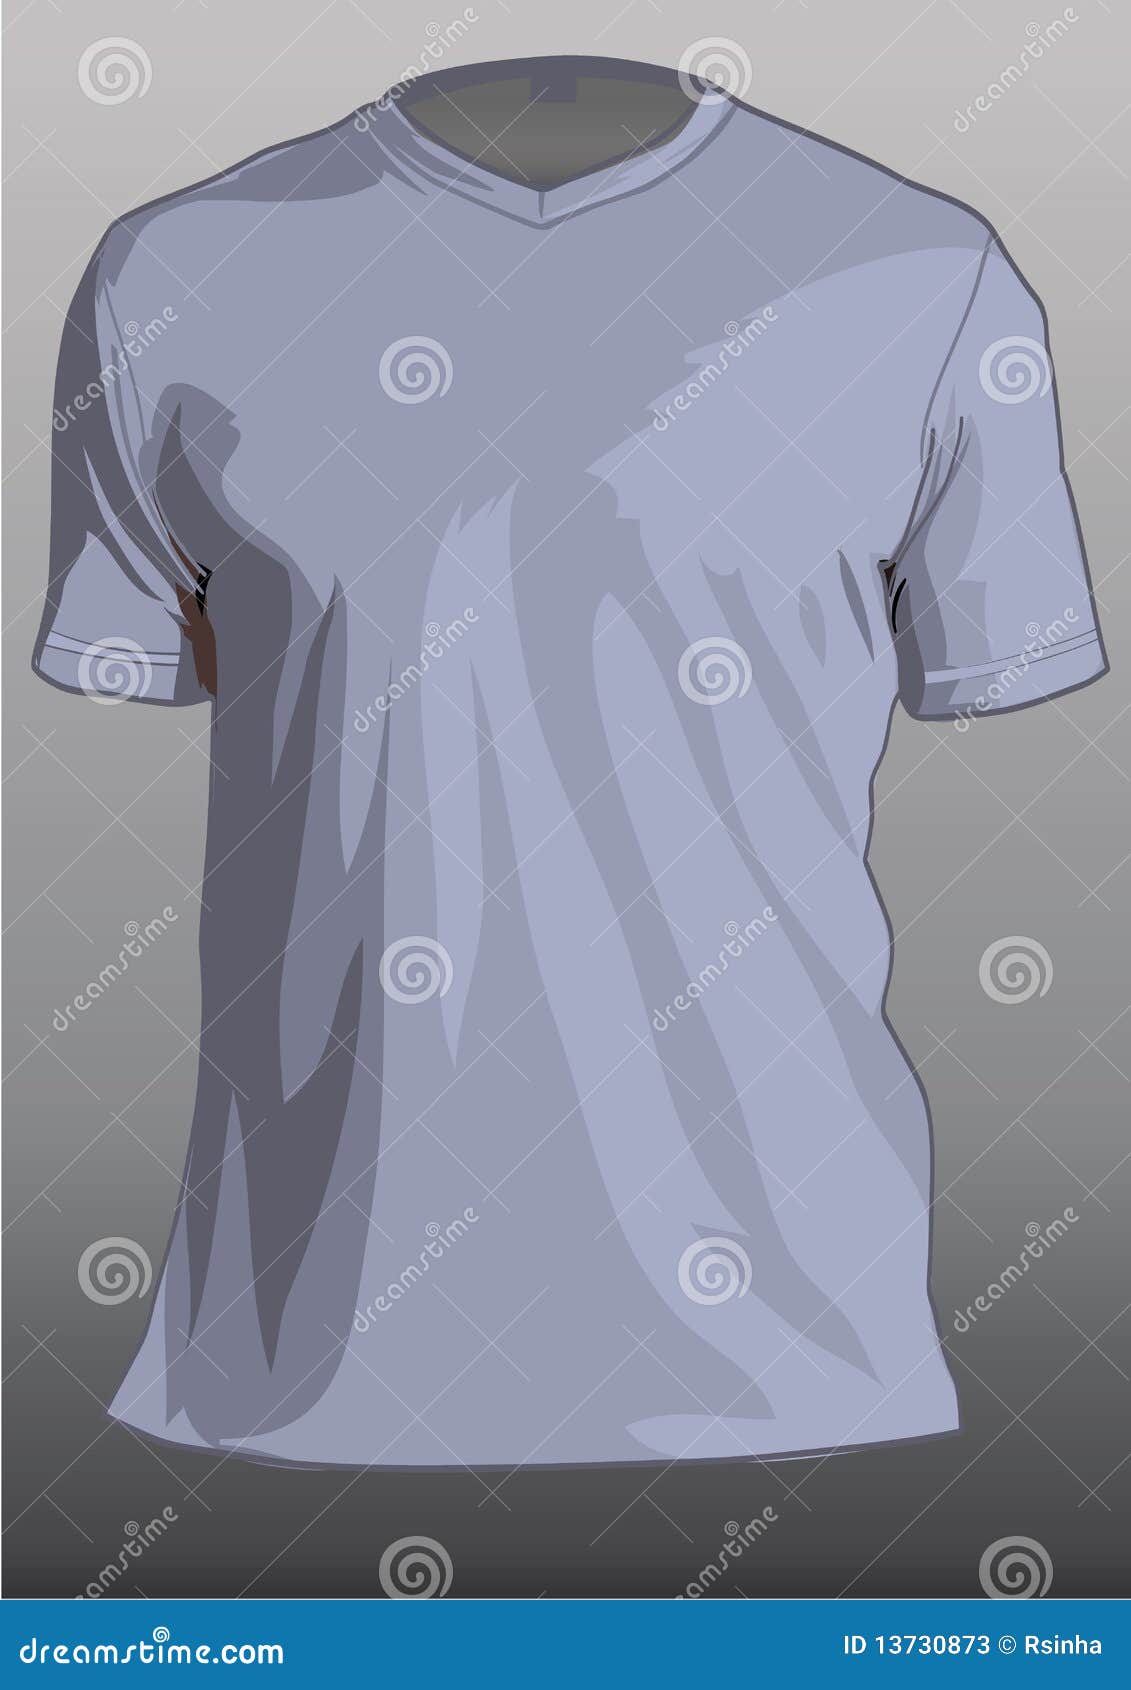 tshirt template with v-neck